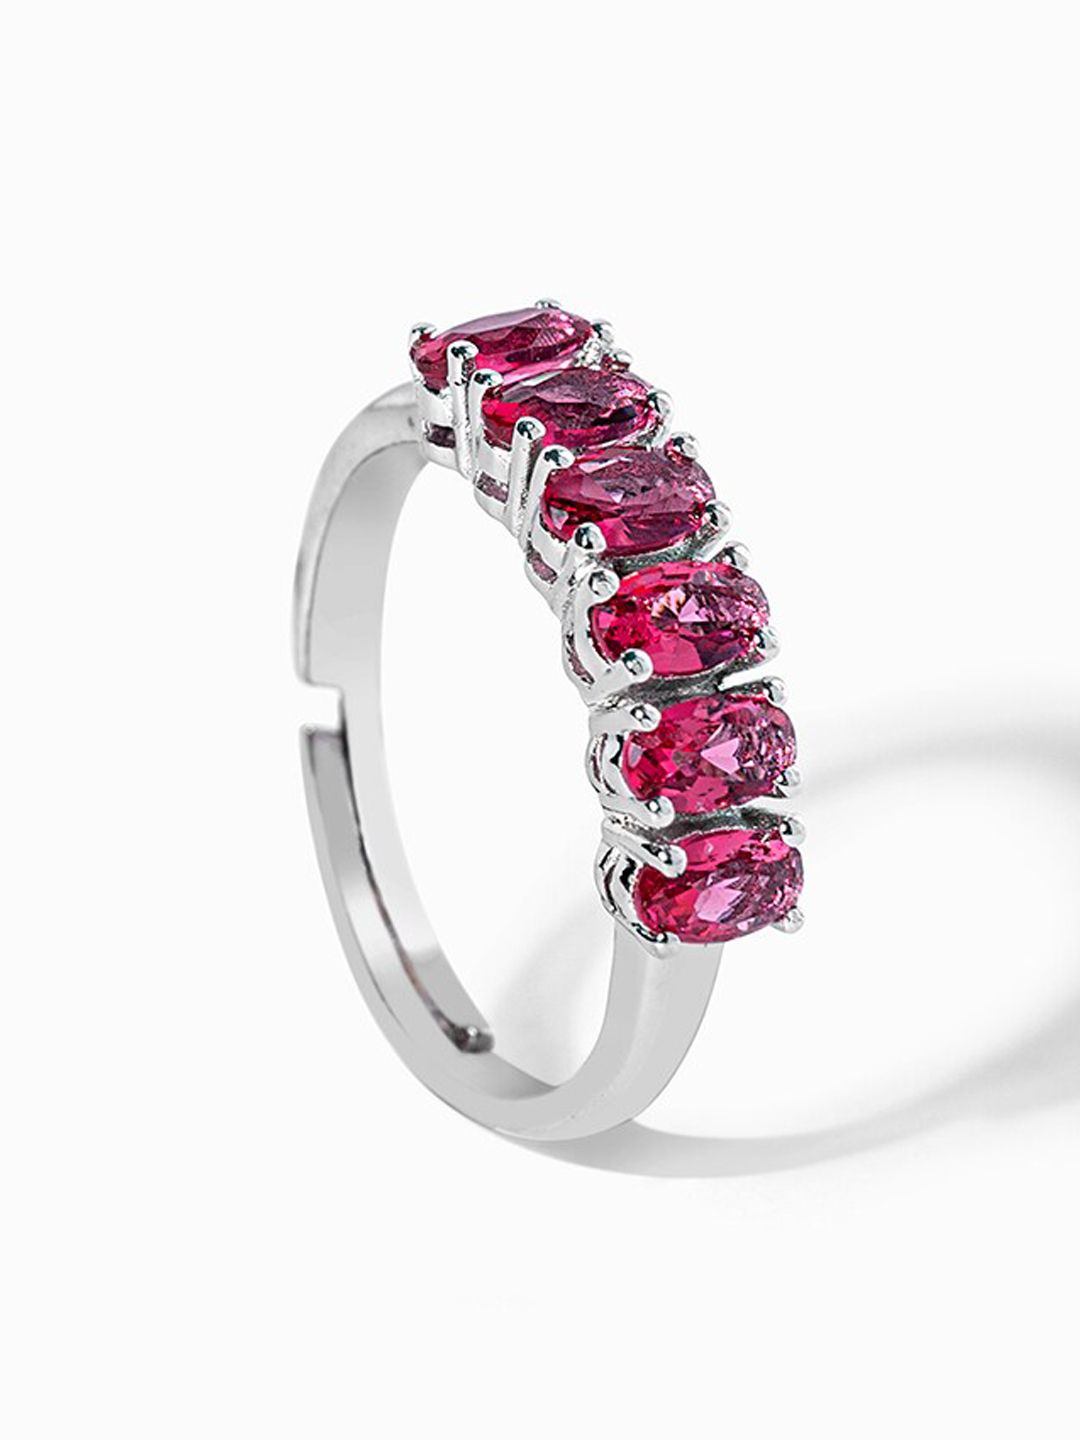 Mikoto by FableStreet Rhodium-Plated Silver-Toned & Pink CZ-Studded Finger Ring Price in India